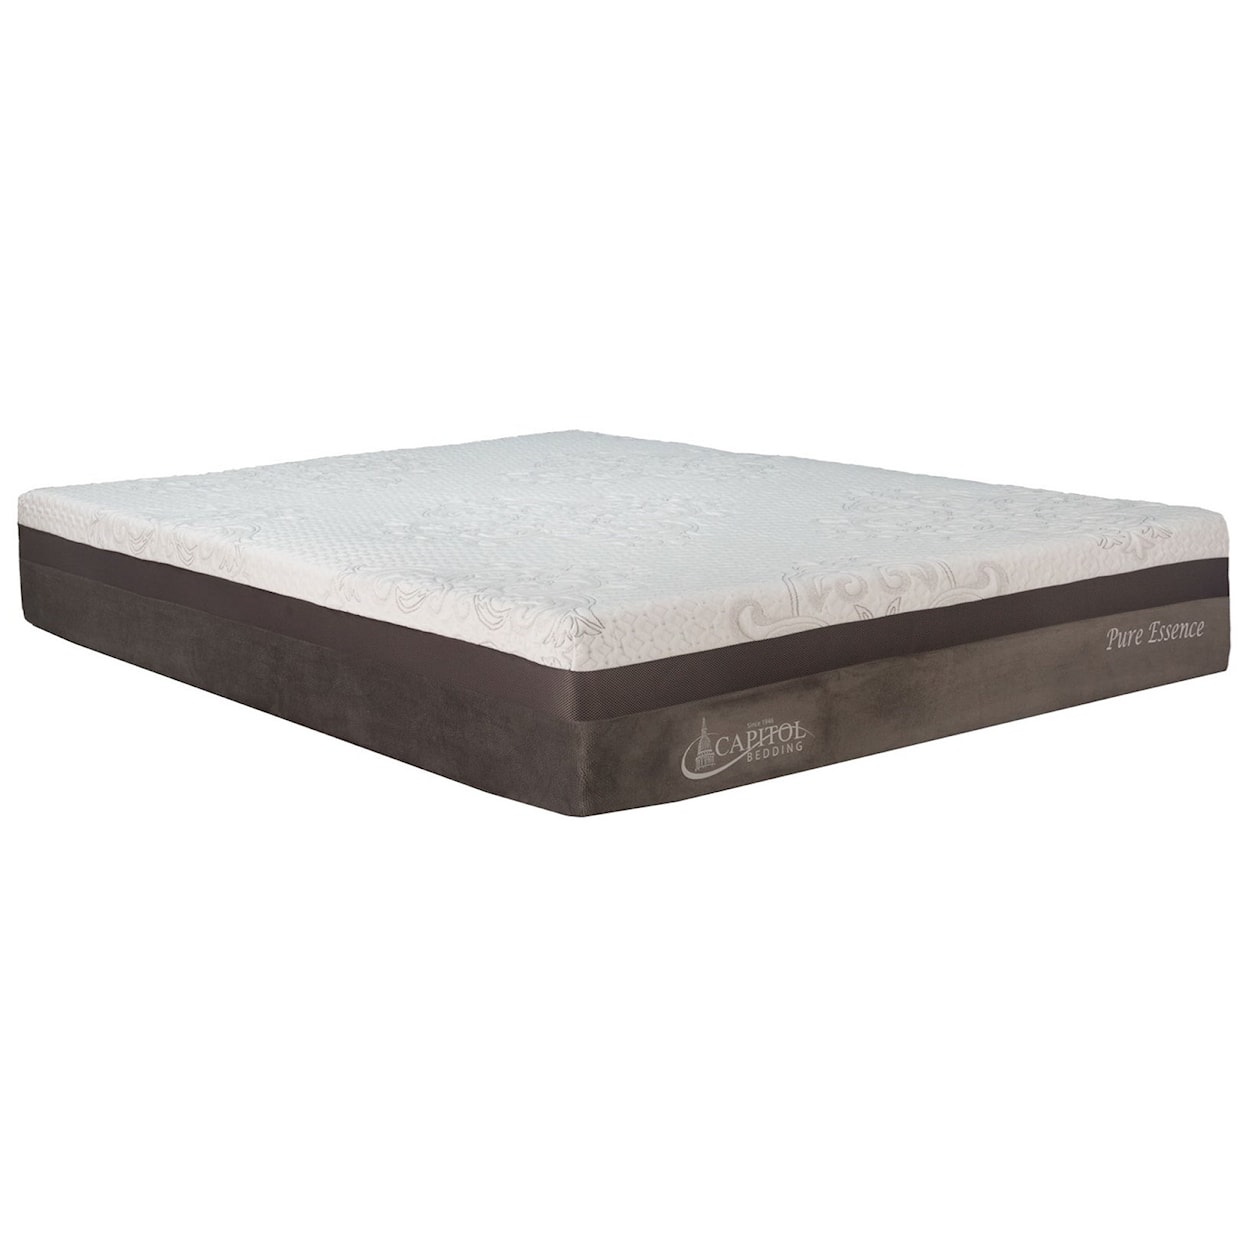 Capitol Bedding Pure Essence II Firm King 11" Gently Firm Mattress